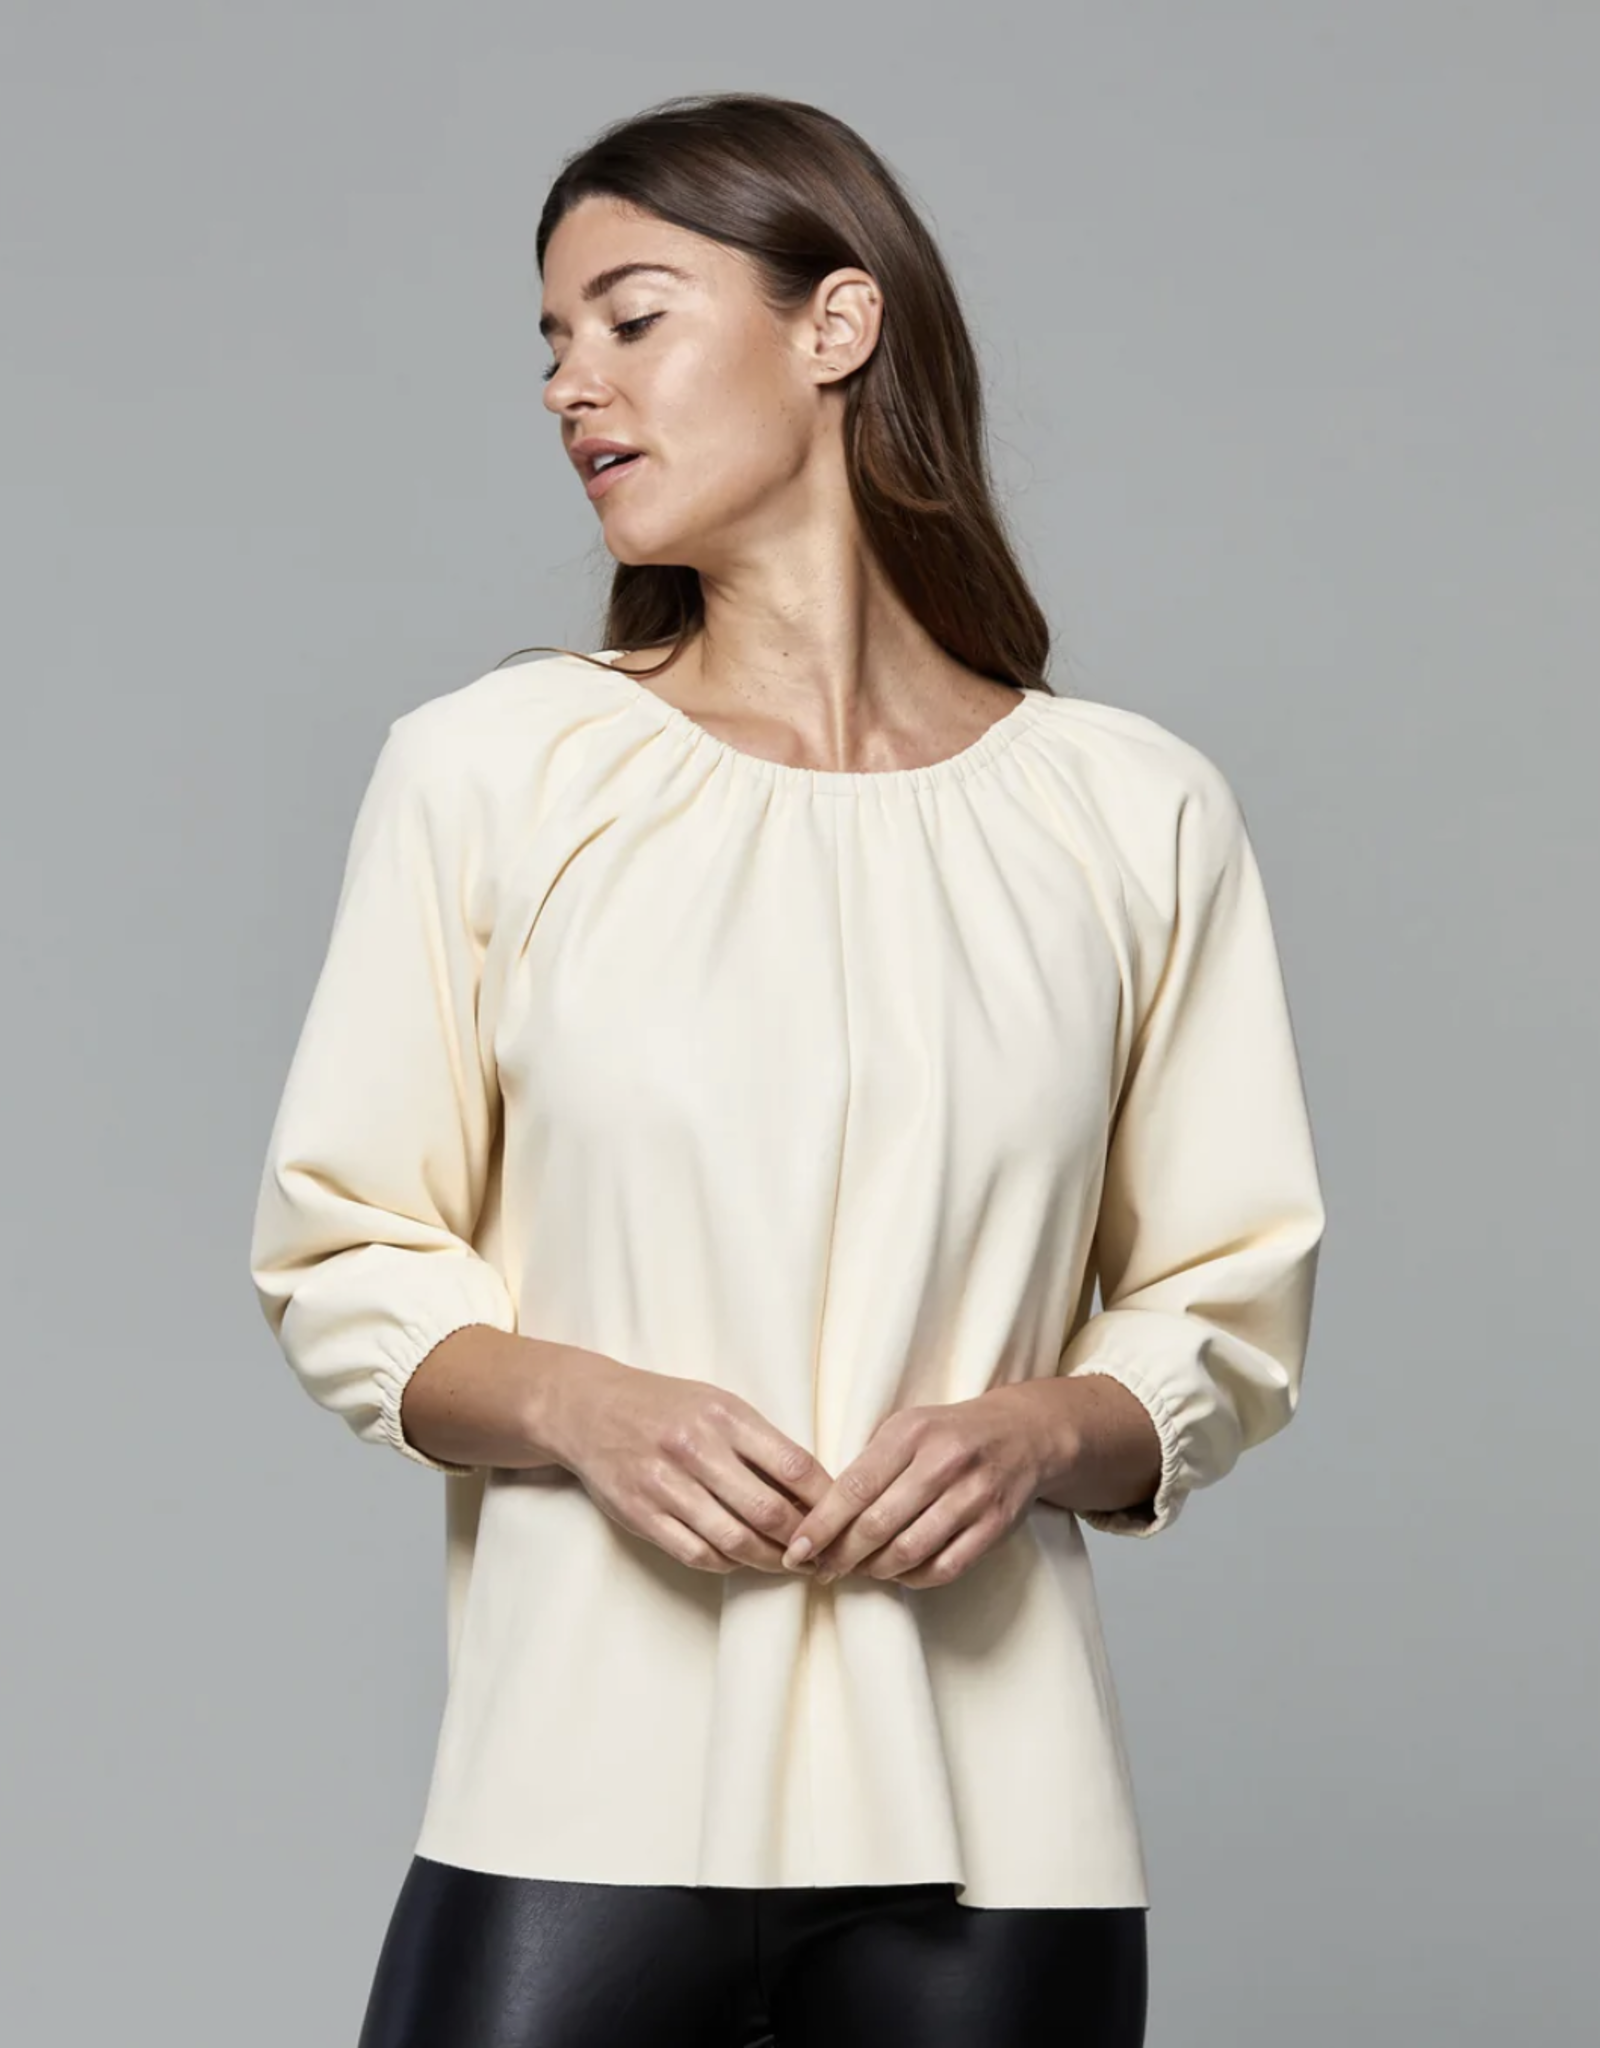 Dolce Cabo Dolce Cabo Vegan Leather Puff Sleeve Top Creme